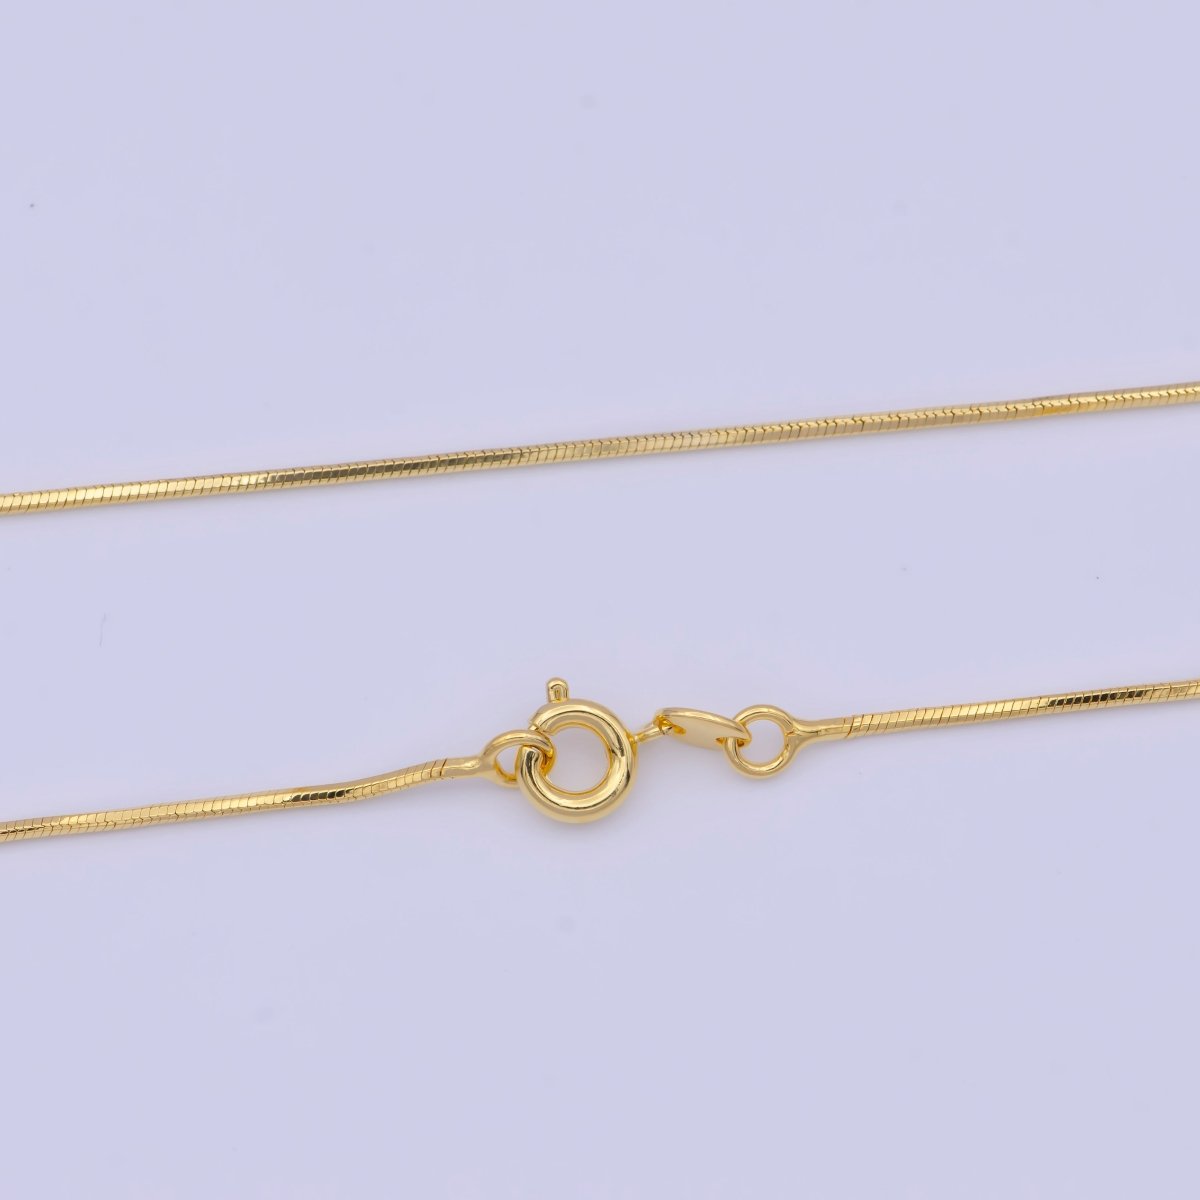 Dainty Layering Chain • Tiny Herringbone Chain • Delicate Necklace • Everyday Necklace • Minimalist Choker Necklace | WA-1147 Clearance Pricing - DLUXCA